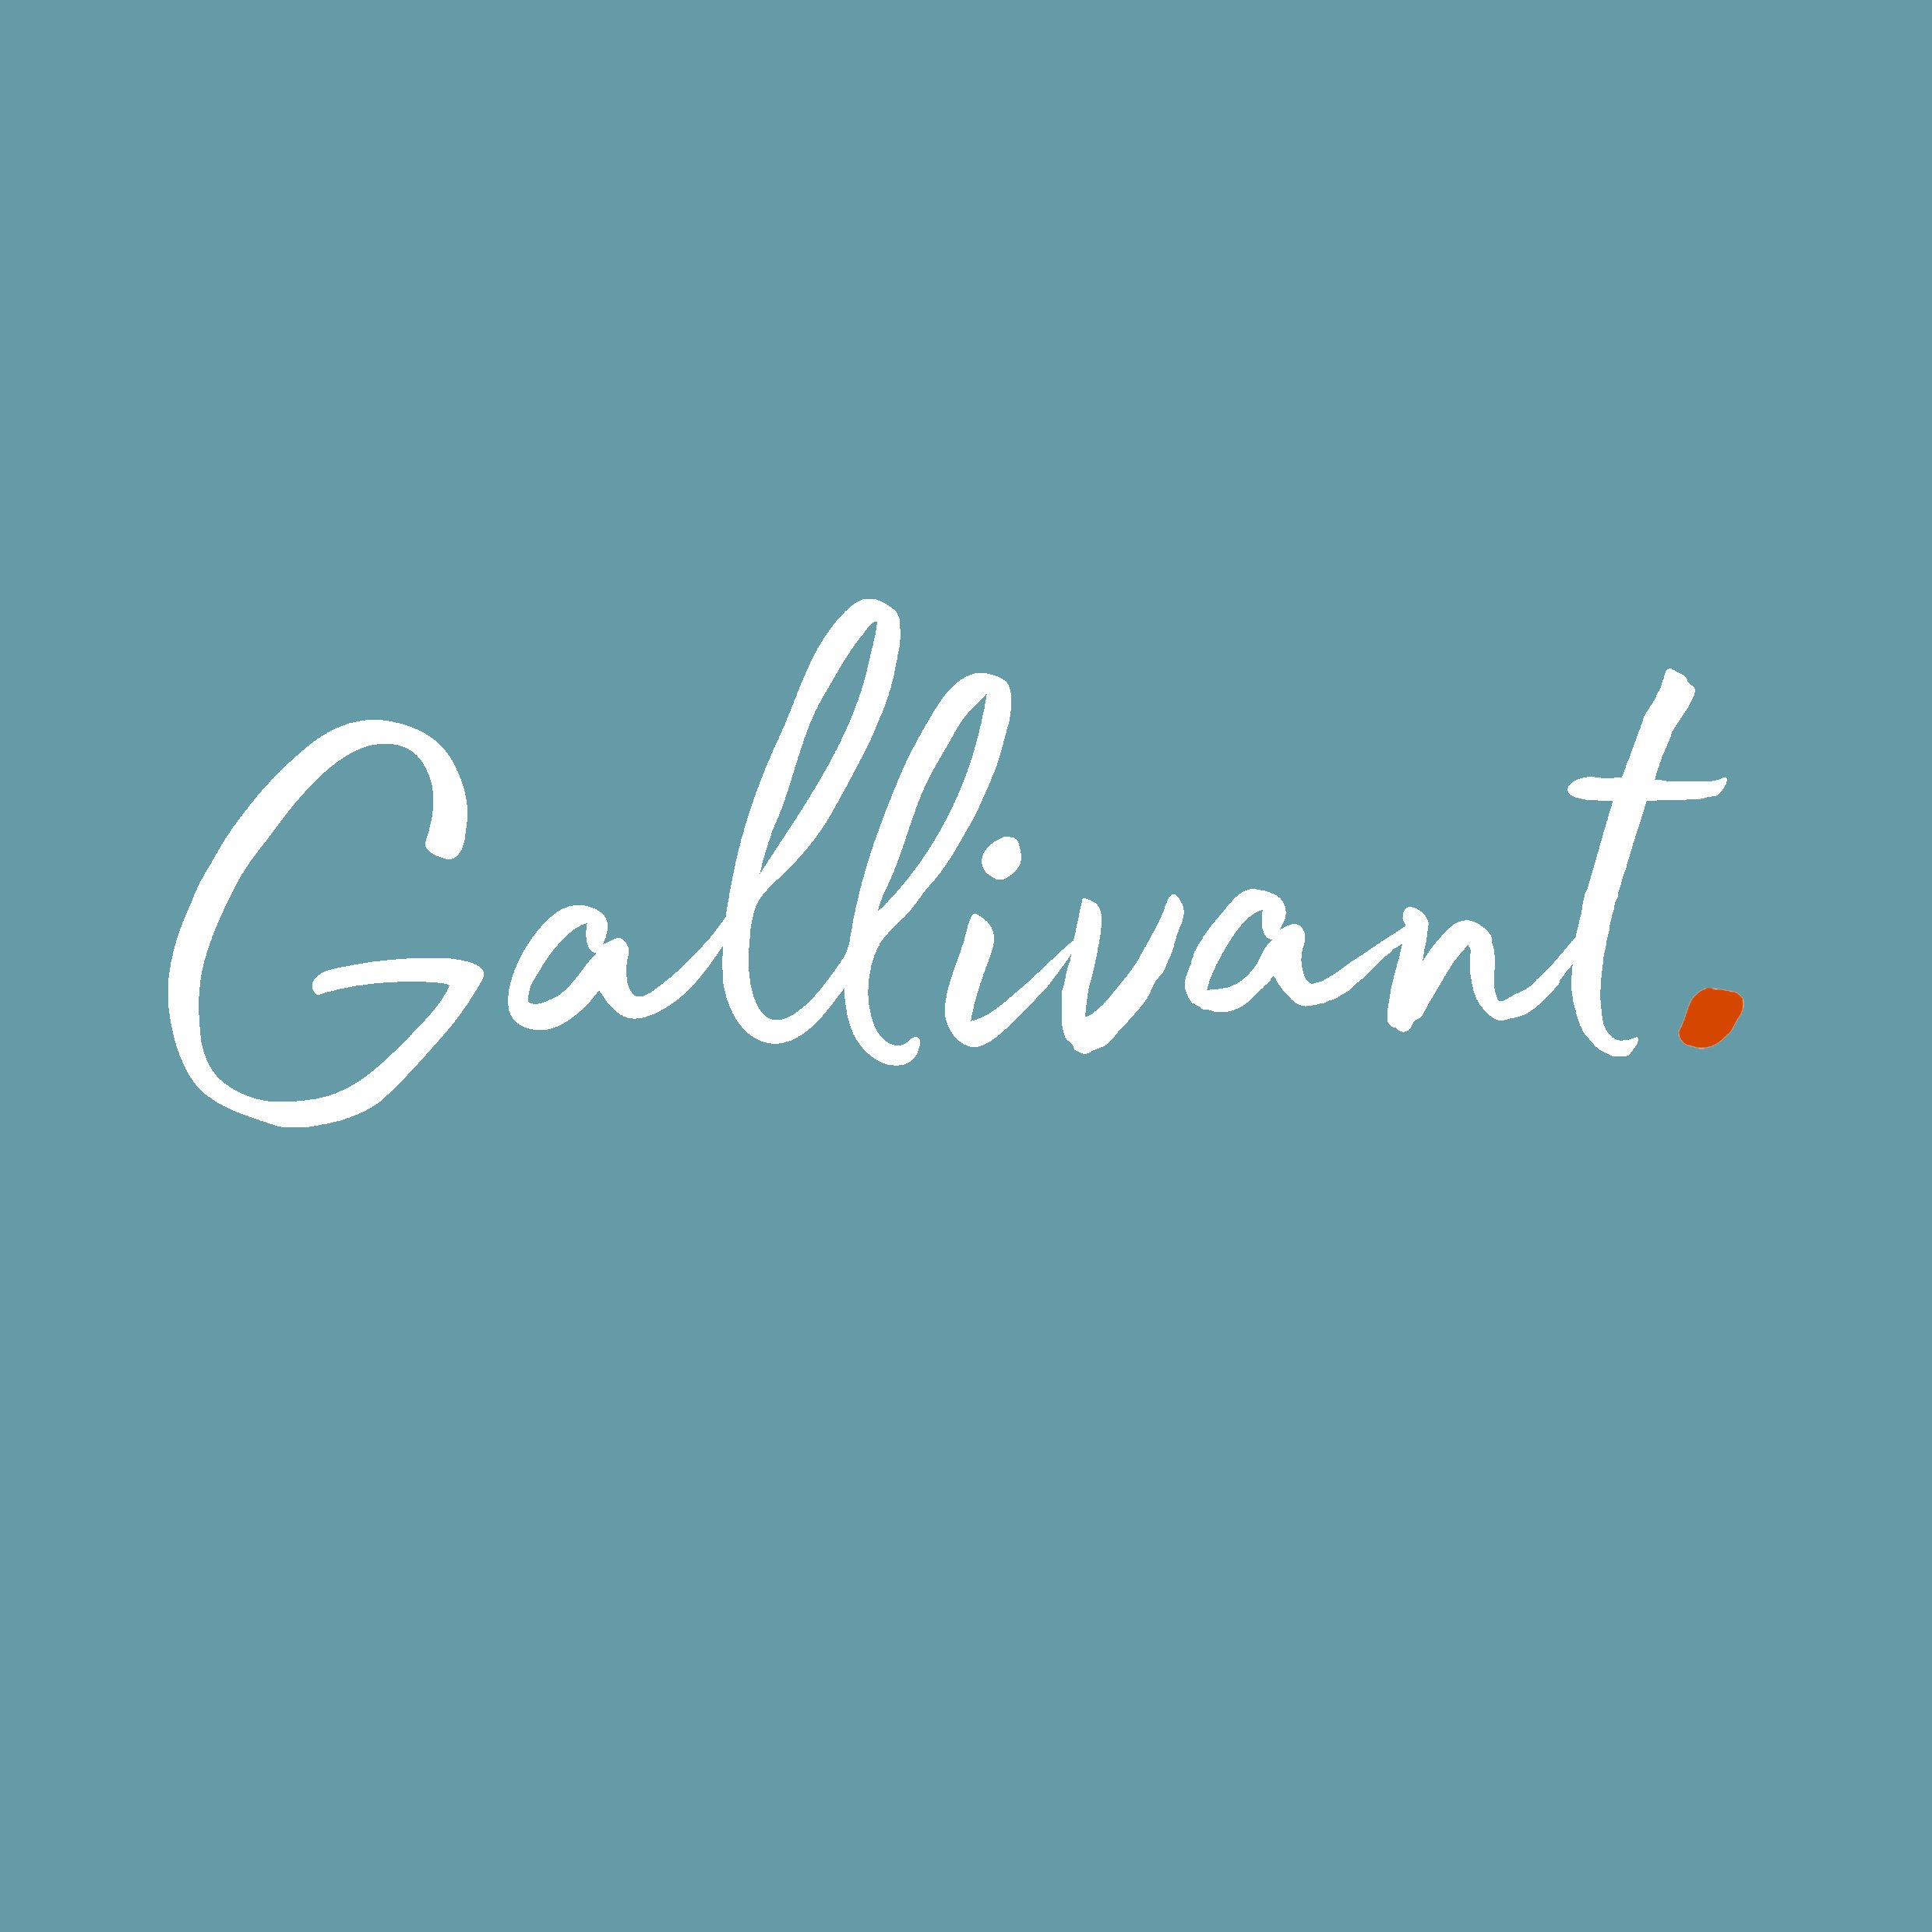 Gallivant is a place where people who like to bicycle can discover inspirational stories and products. A place to find and share ideas to roam further.